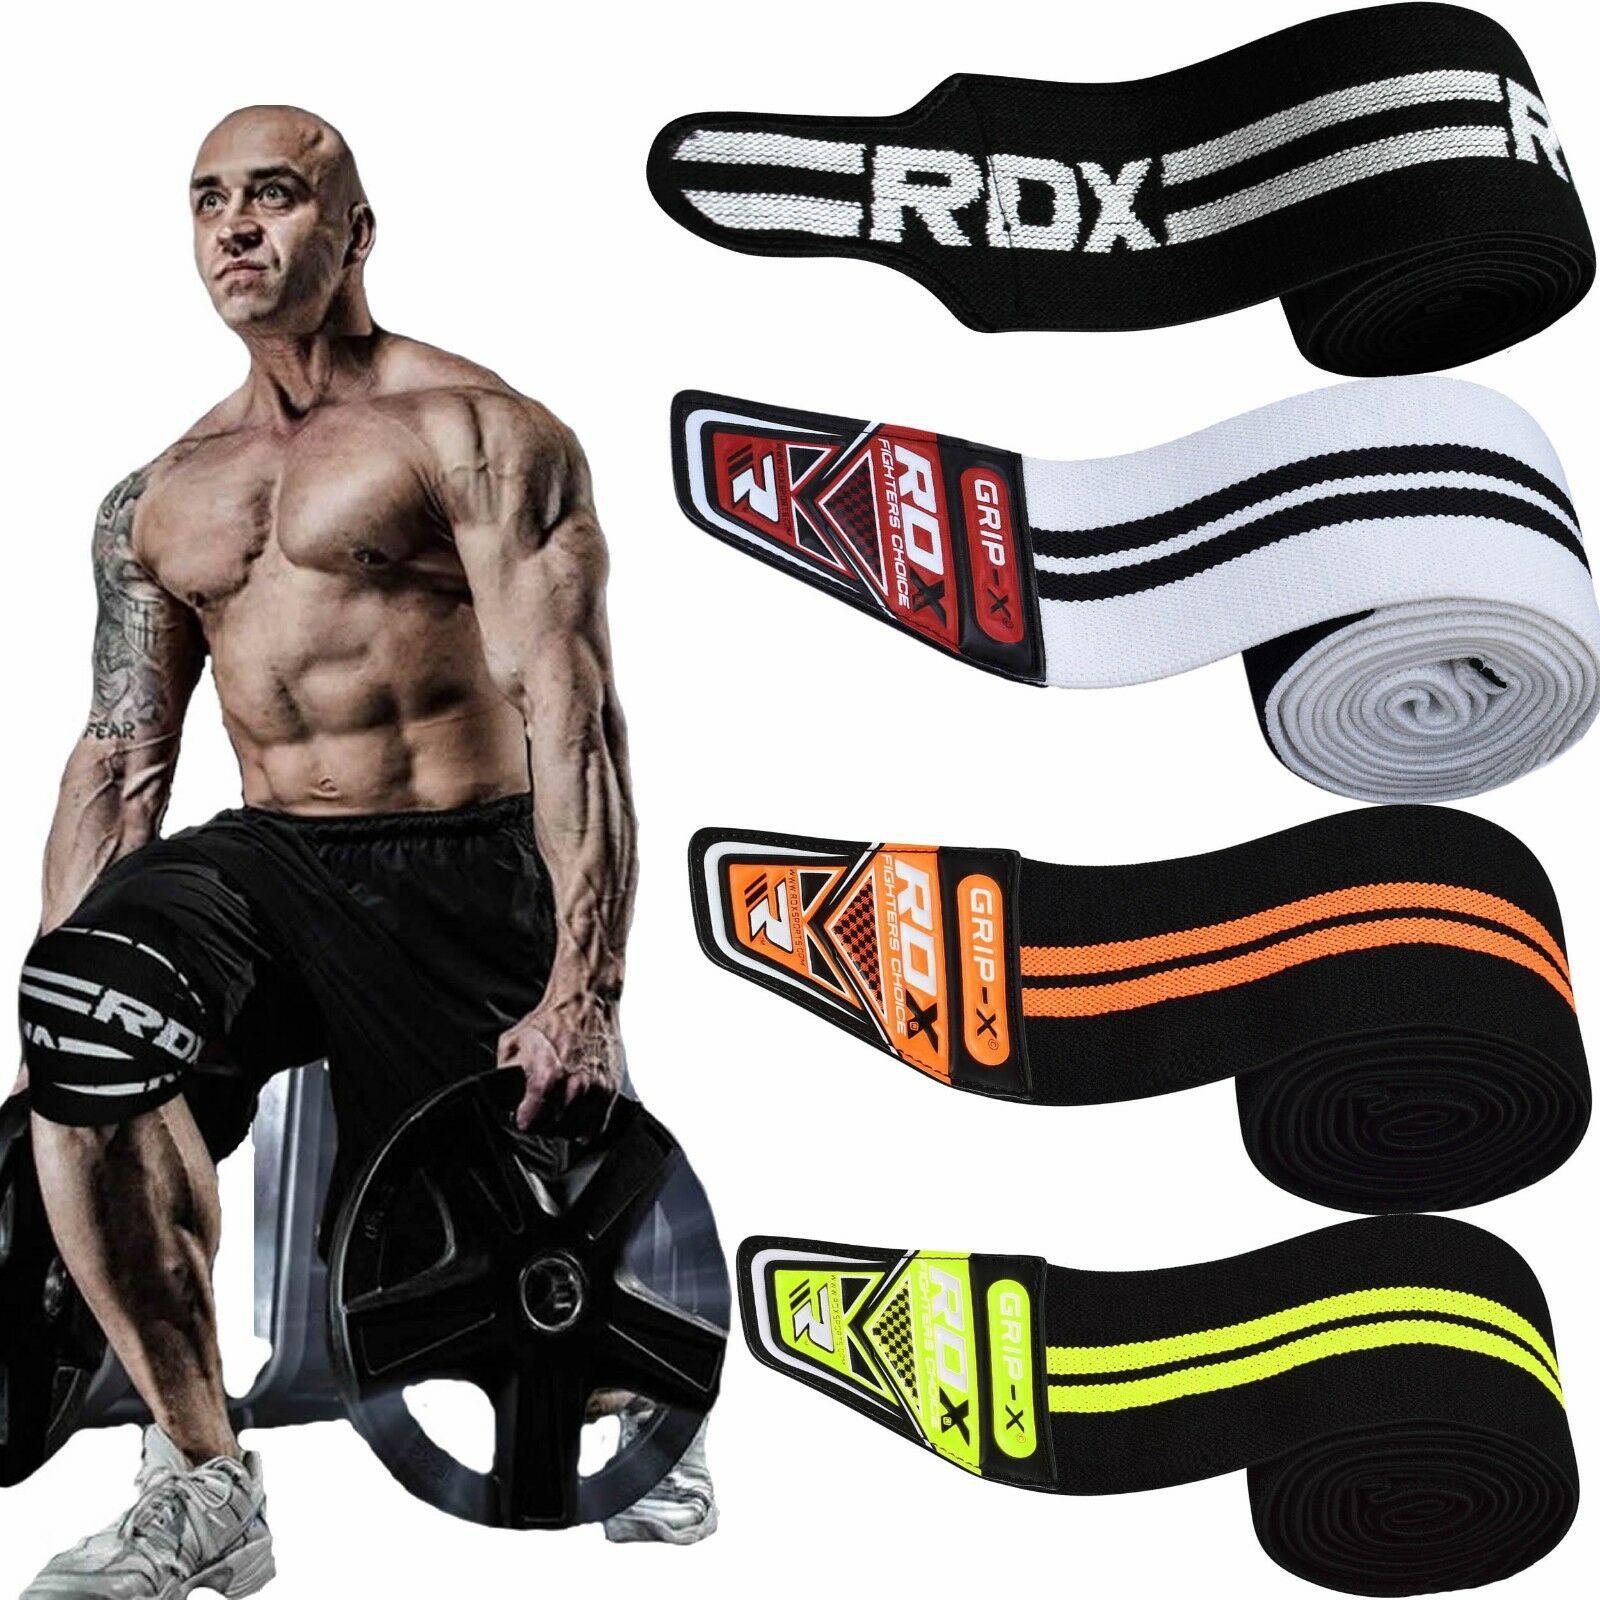 Pro Knee Pads Weight Lifting Bandage Straps Guard Pads Sleeves Powerlifting Gym 